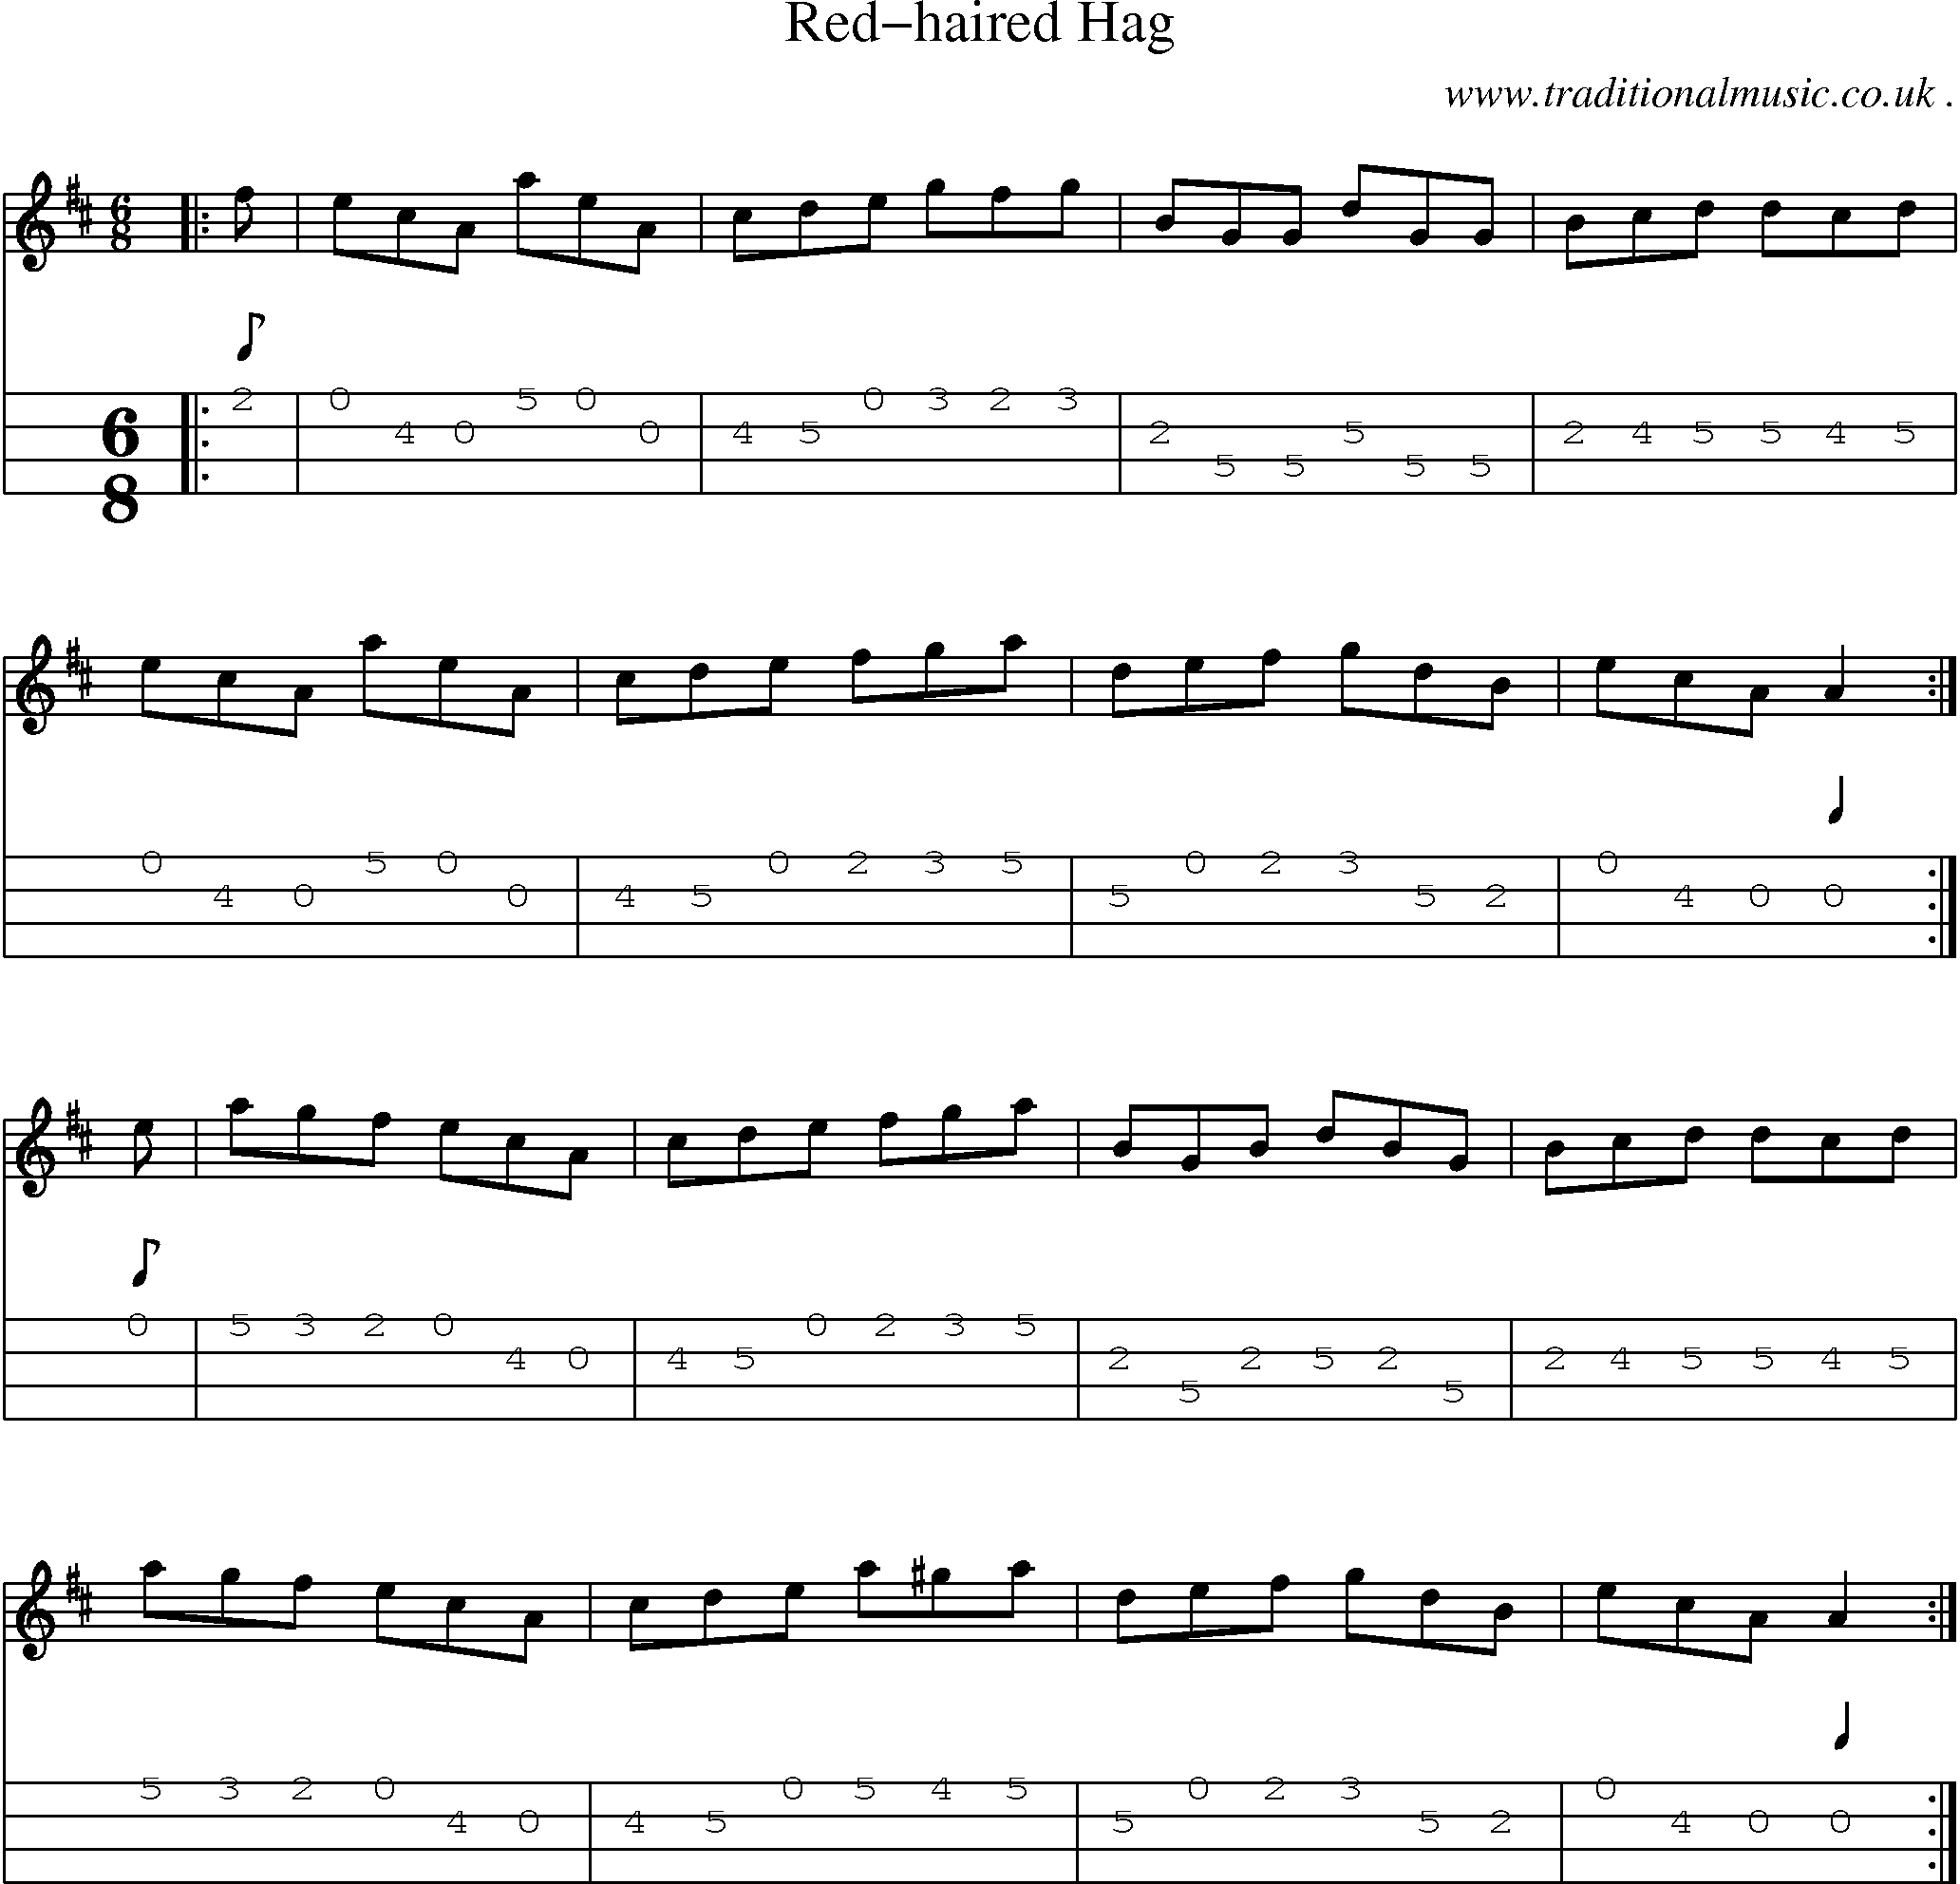 Sheet-Music and Mandolin Tabs for Red-haired Hag